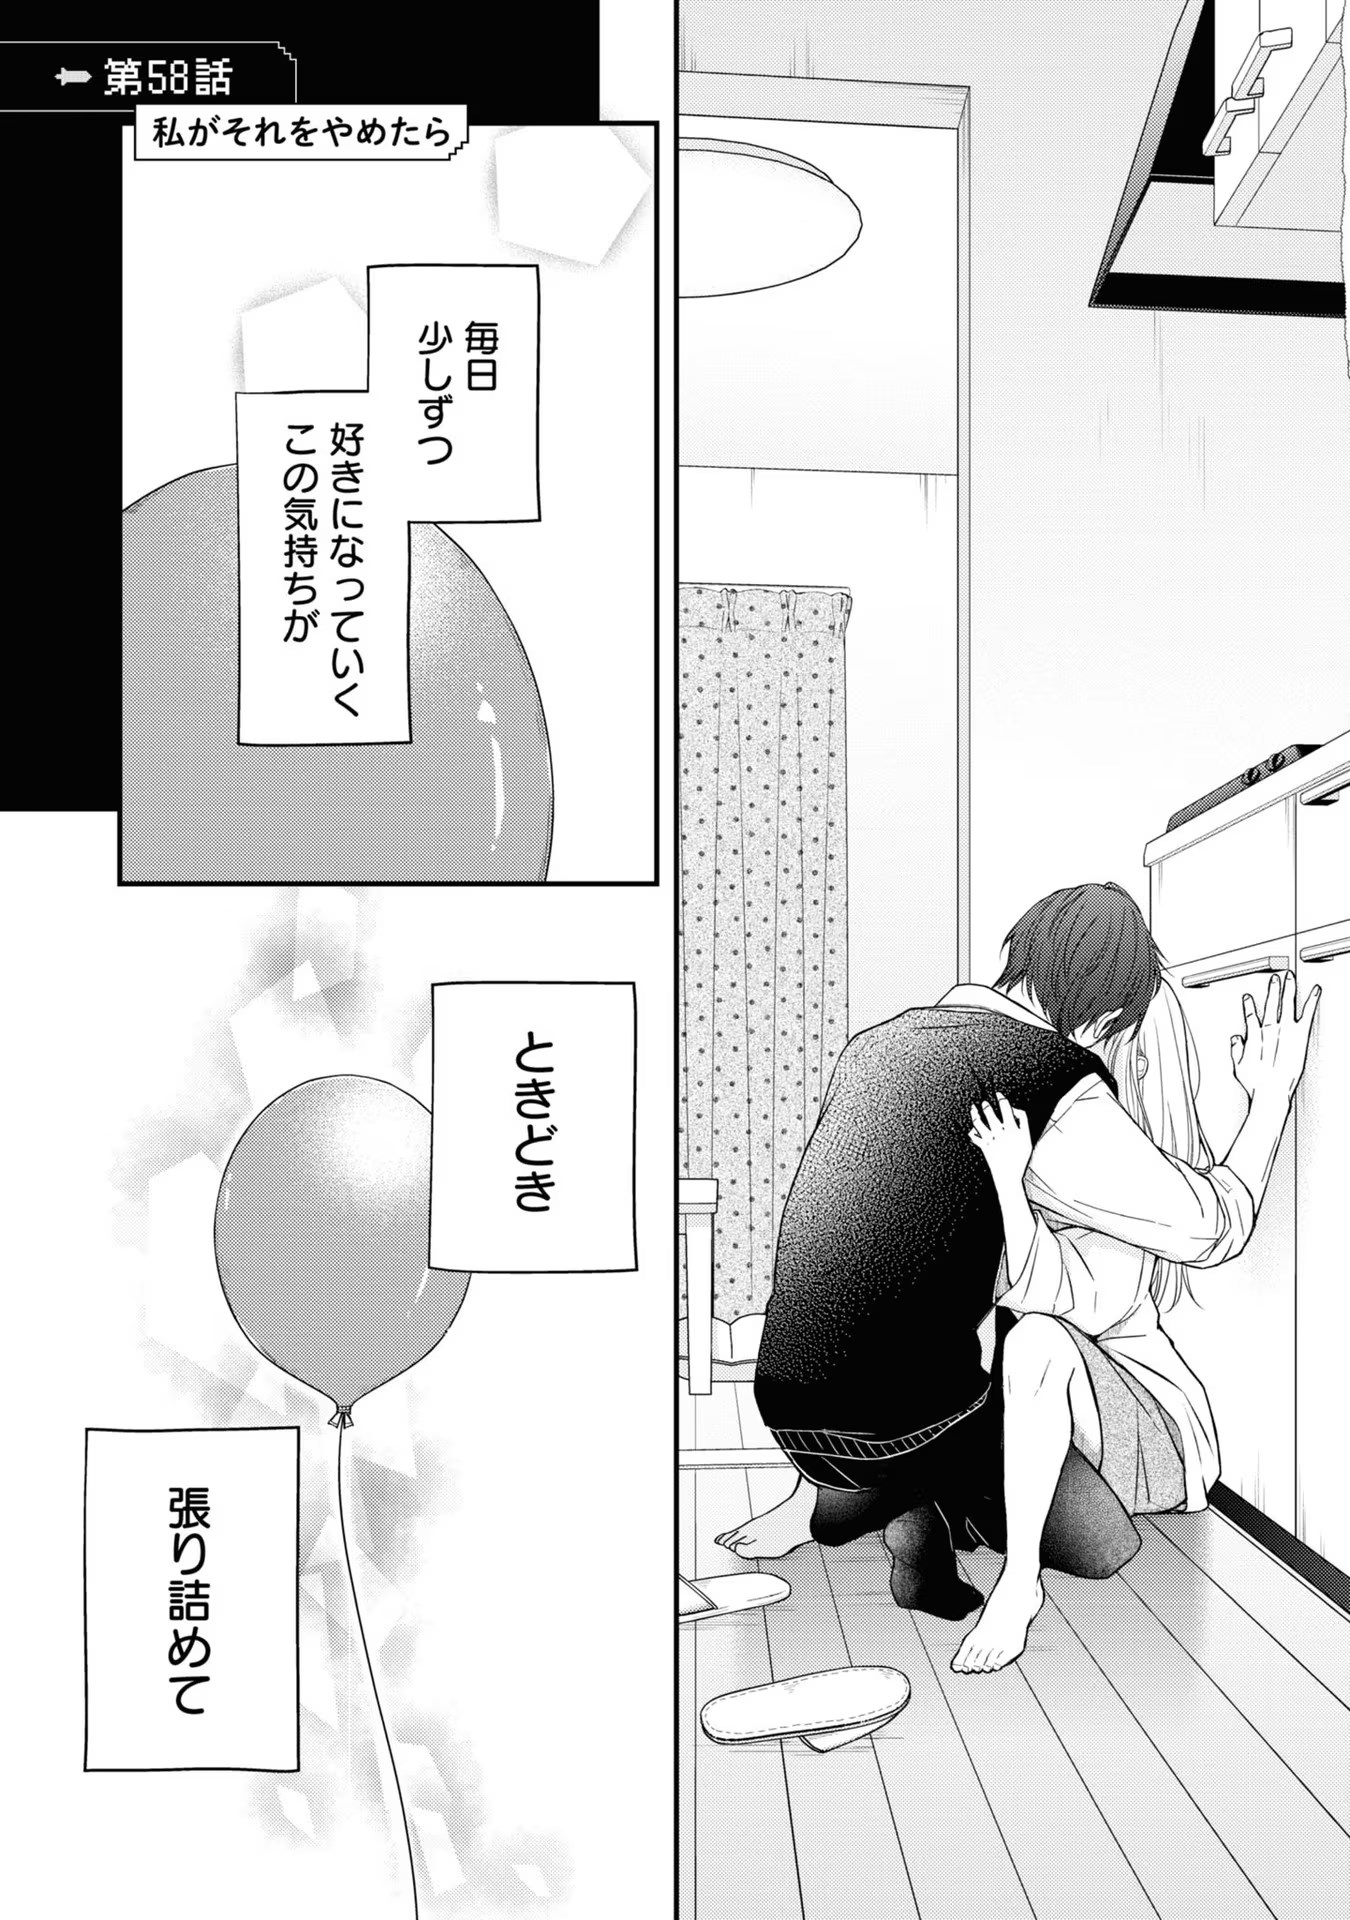 Chapter 57, My Love Story with Yamada-kun at Lv999